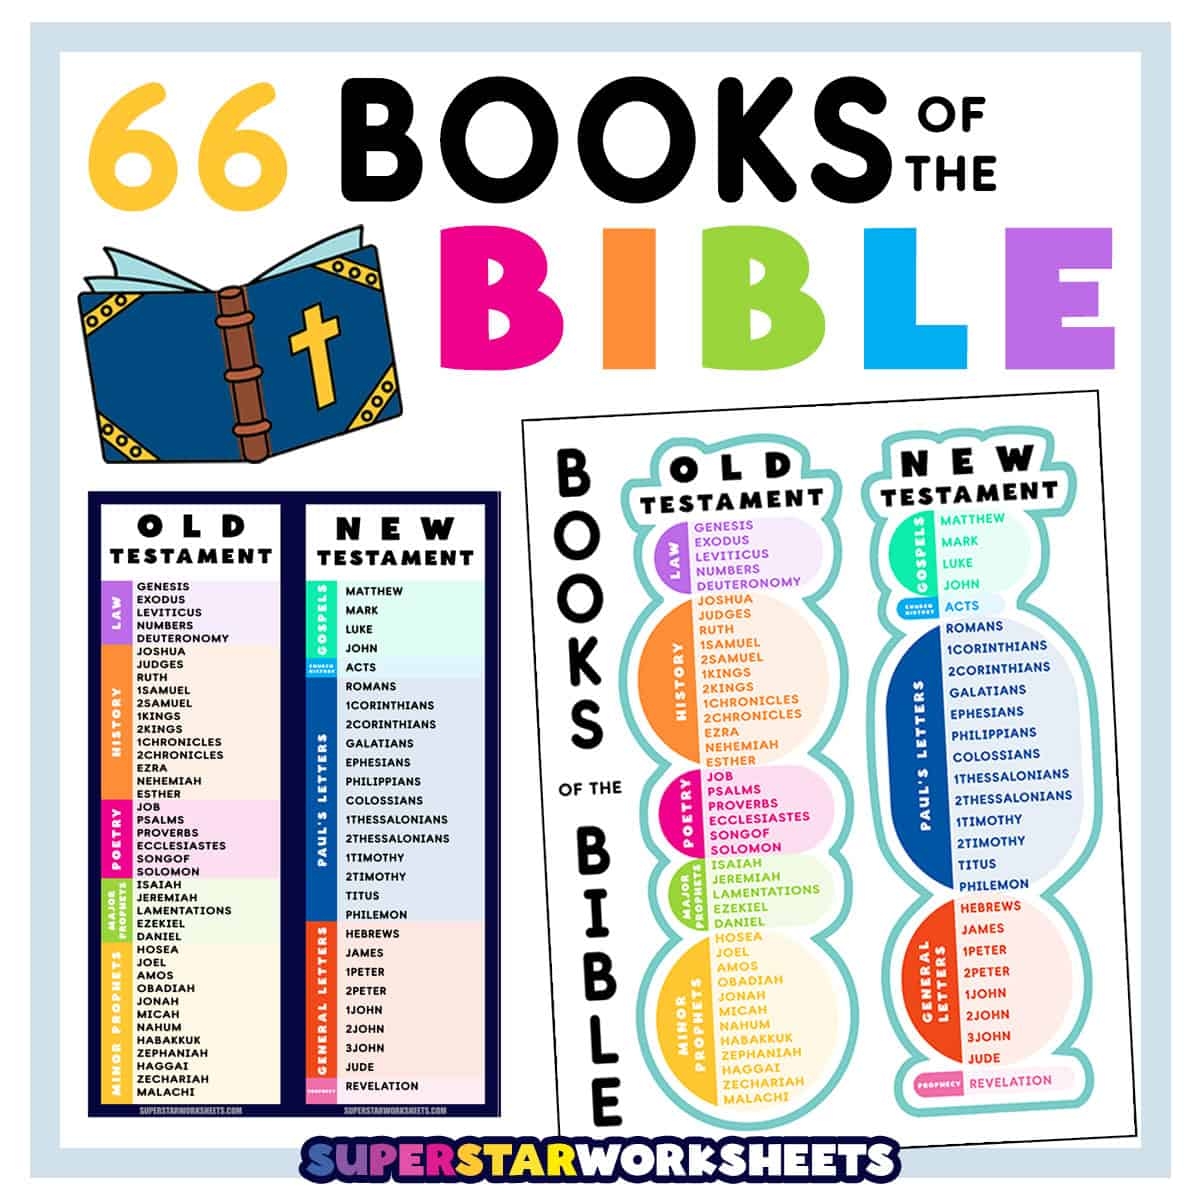 Books Of The Bible List Superstar Worksheets